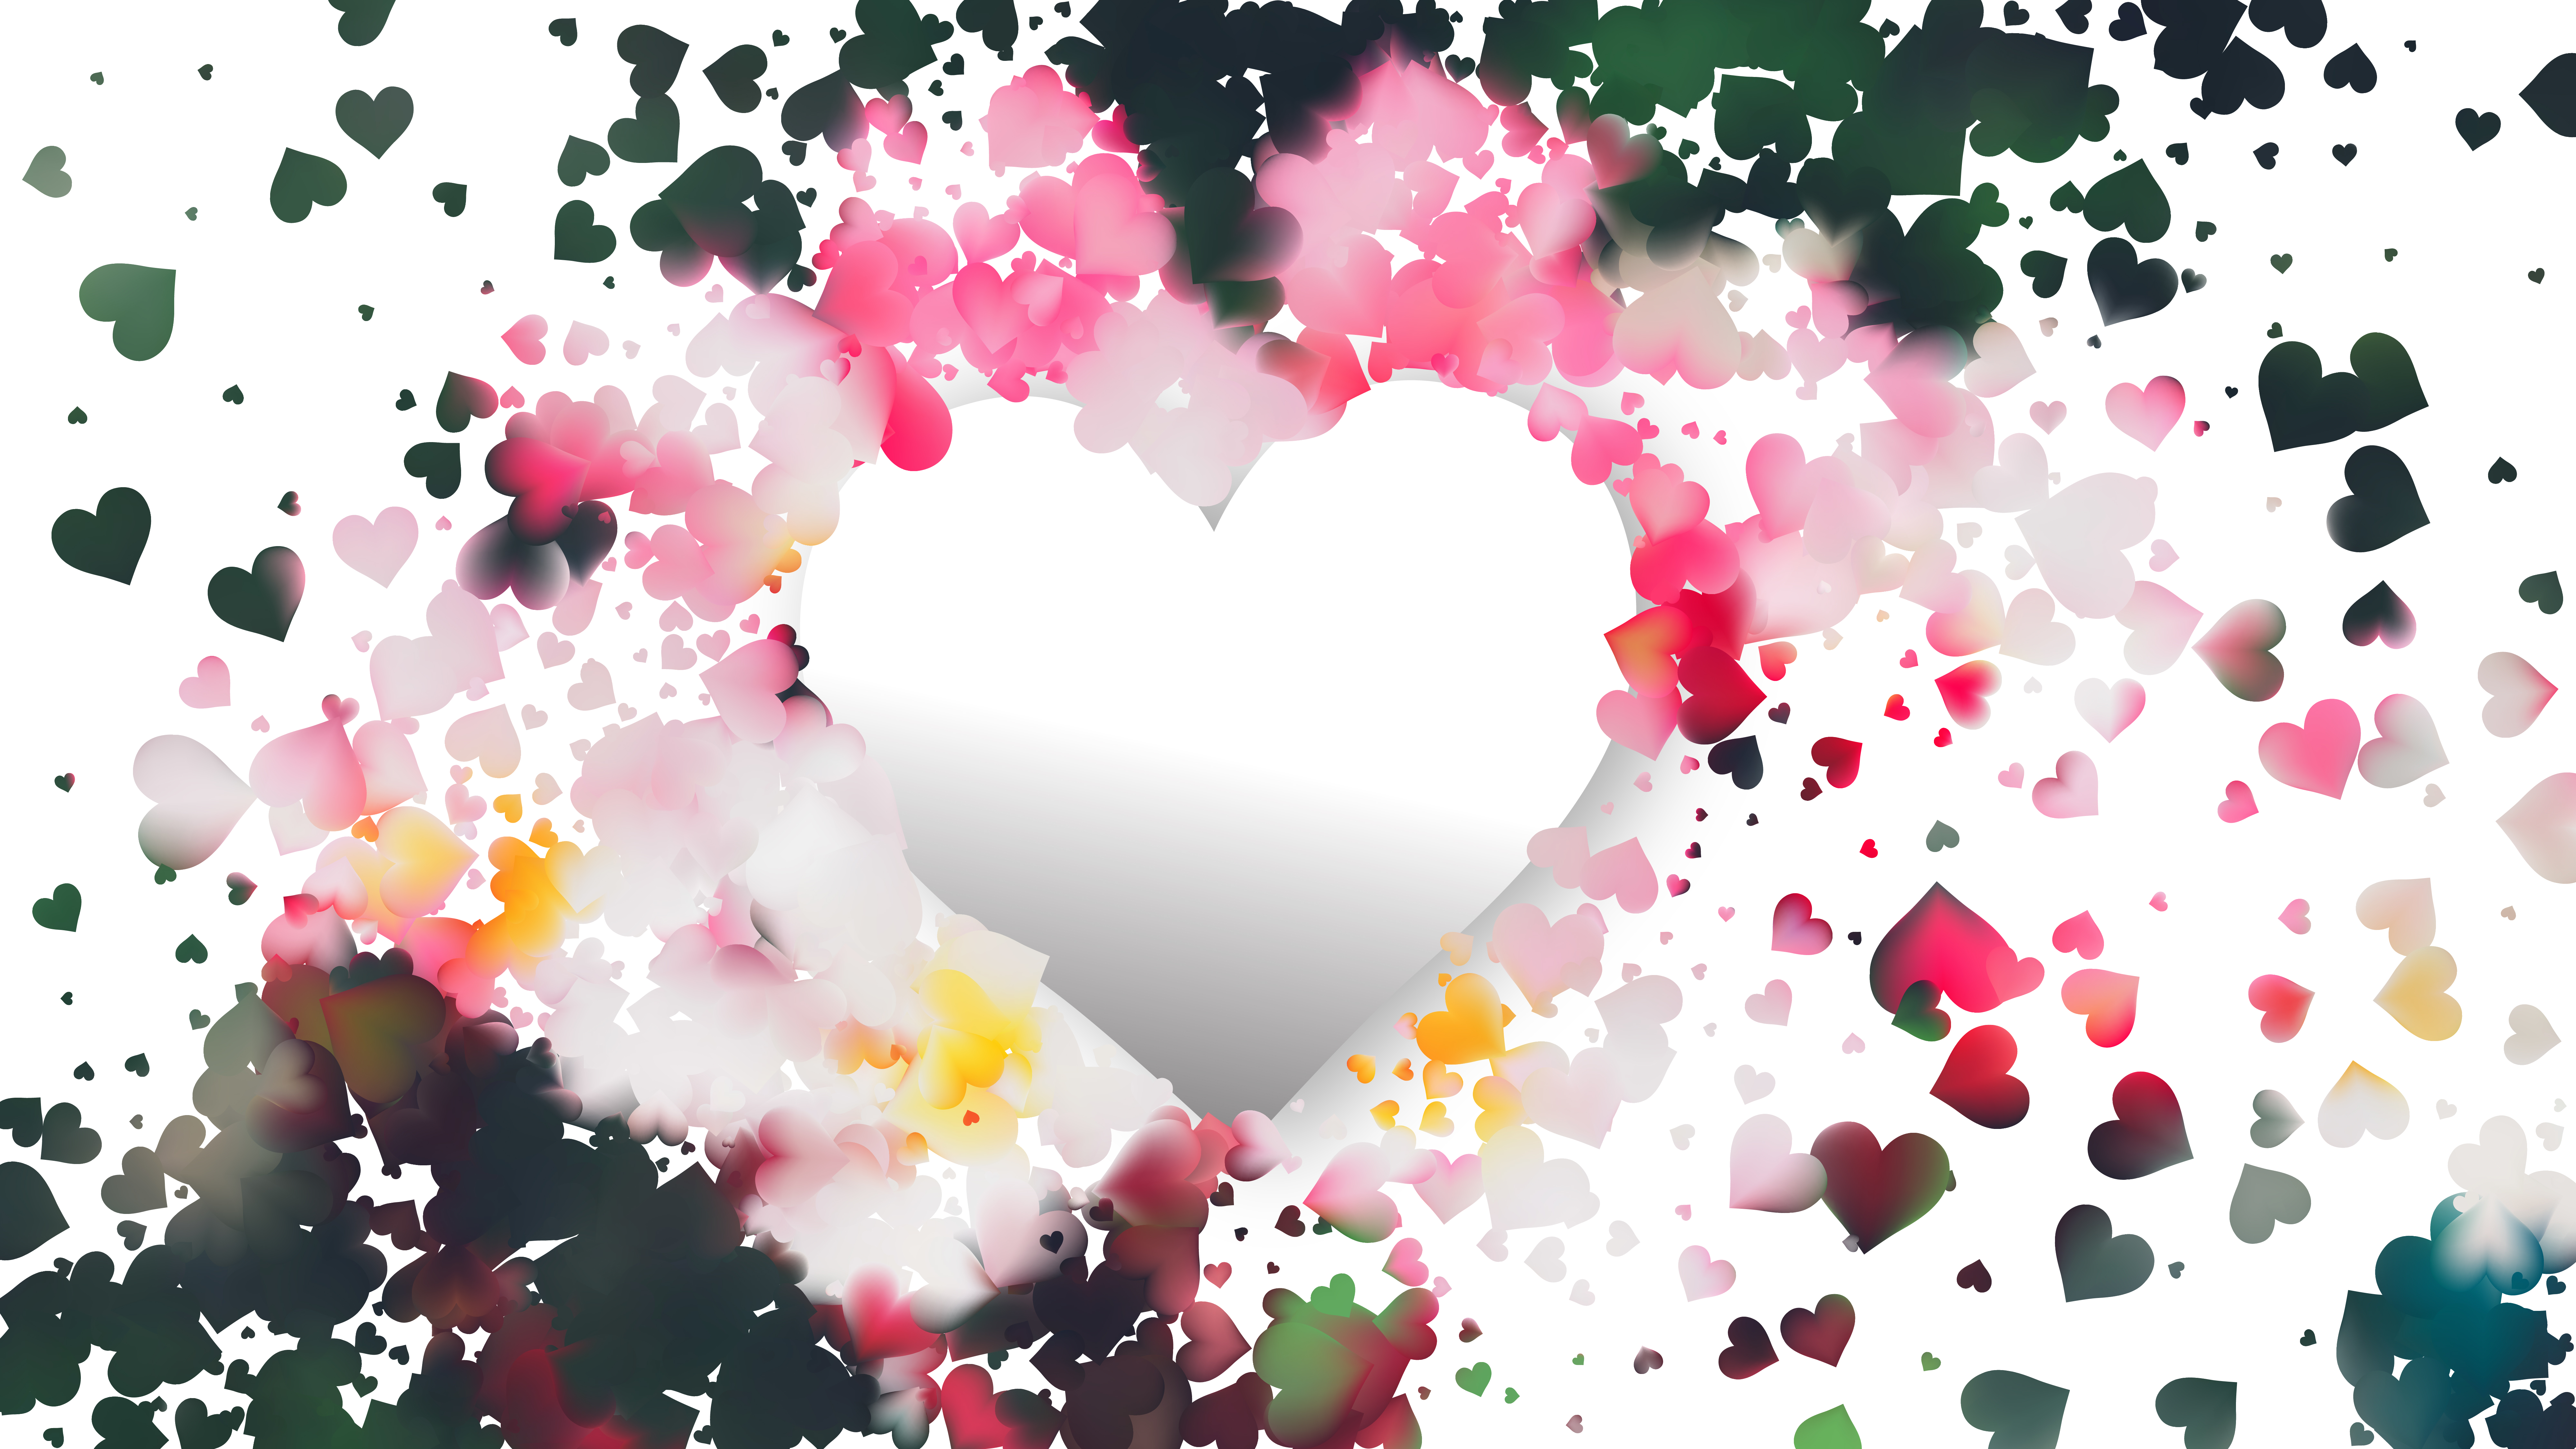 Free Pink and Green Heart Wallpaper Background Vector Art